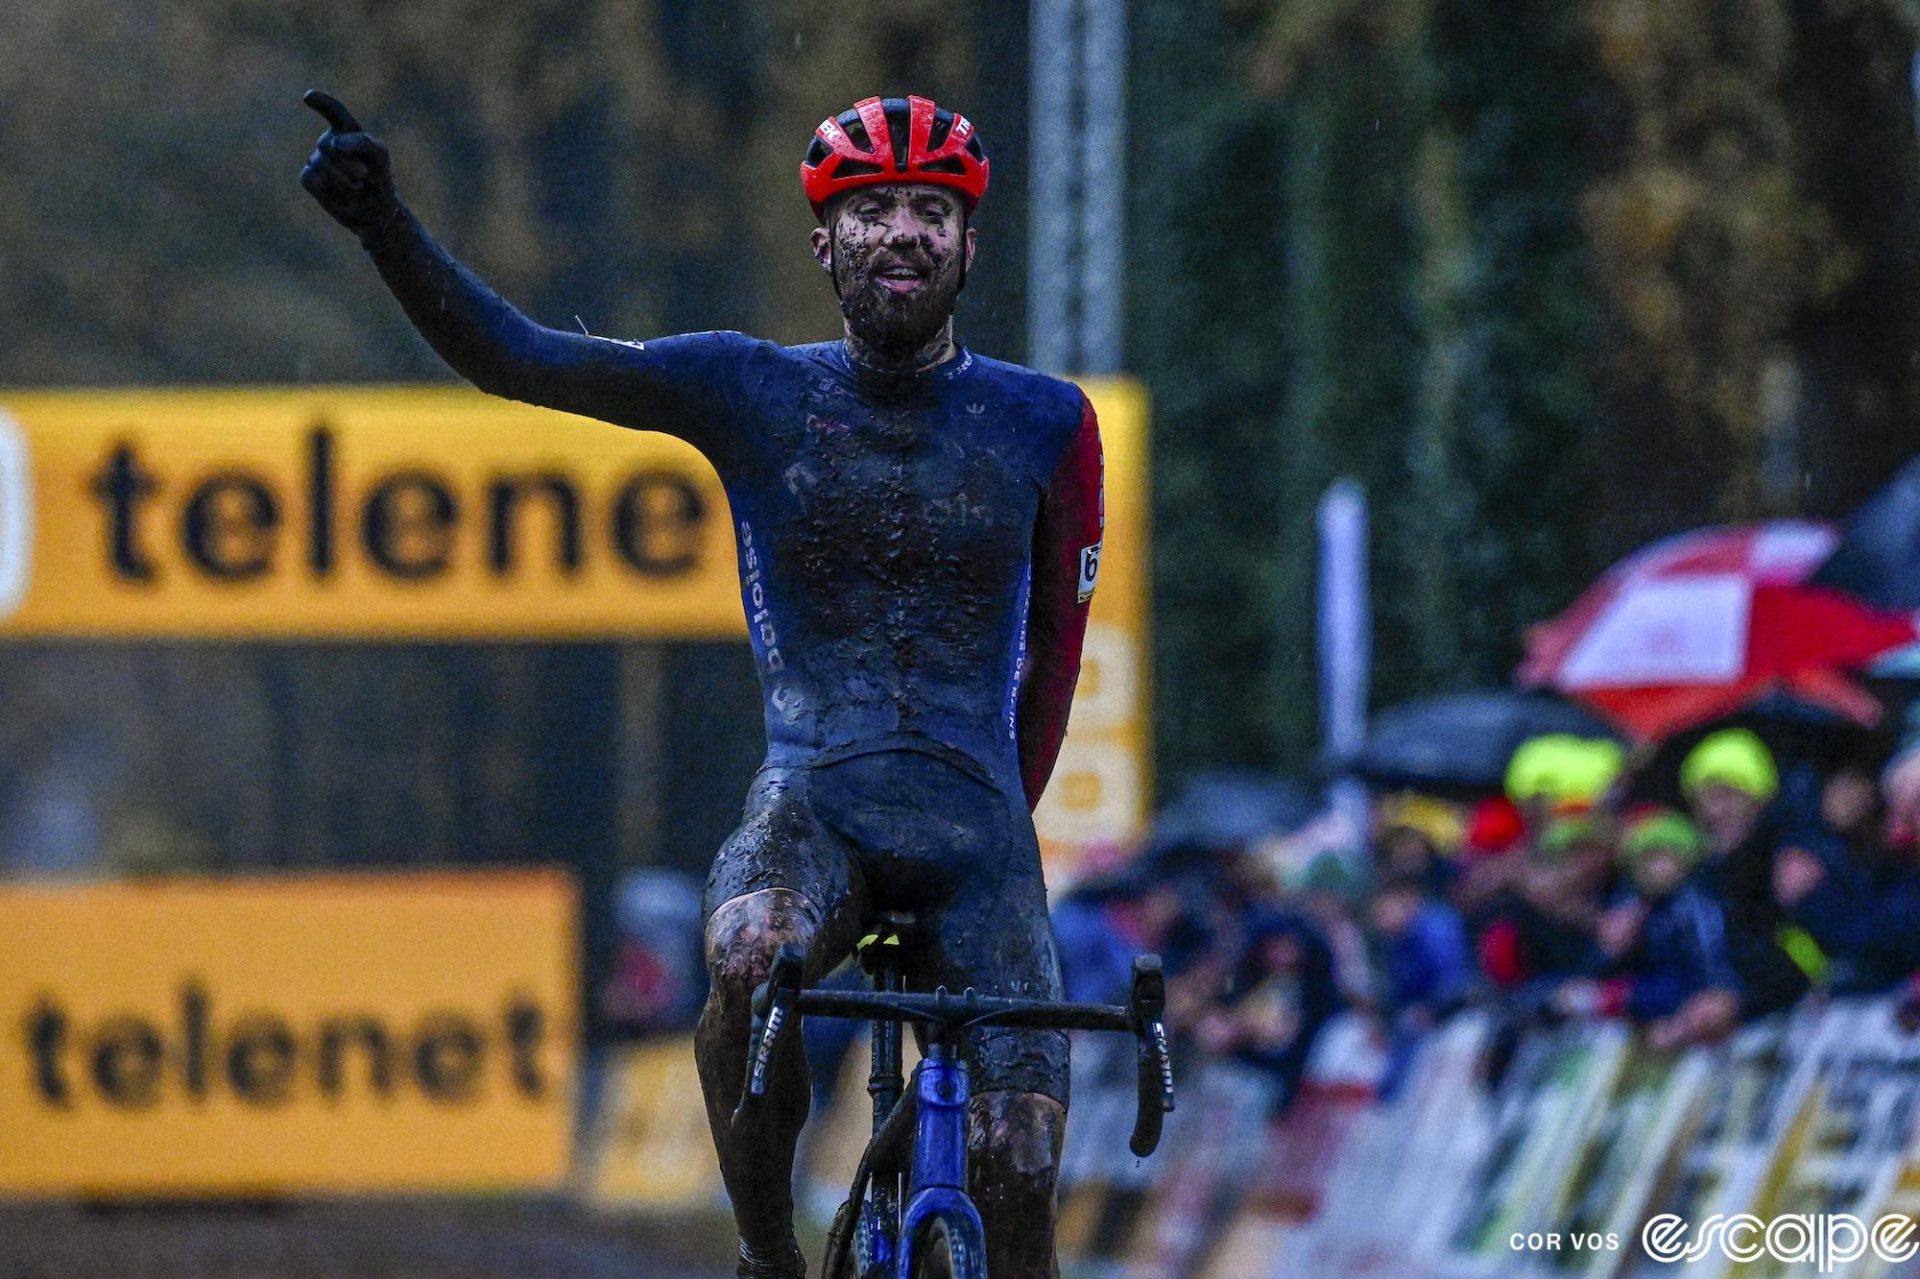 Joris Nieuwenhuis offers a one-handed victory salute as he wins Superprestige Merksplas. His blue kit is covered in mud, logos unreadable, and his full beard is also full of mud up to around his eyes.